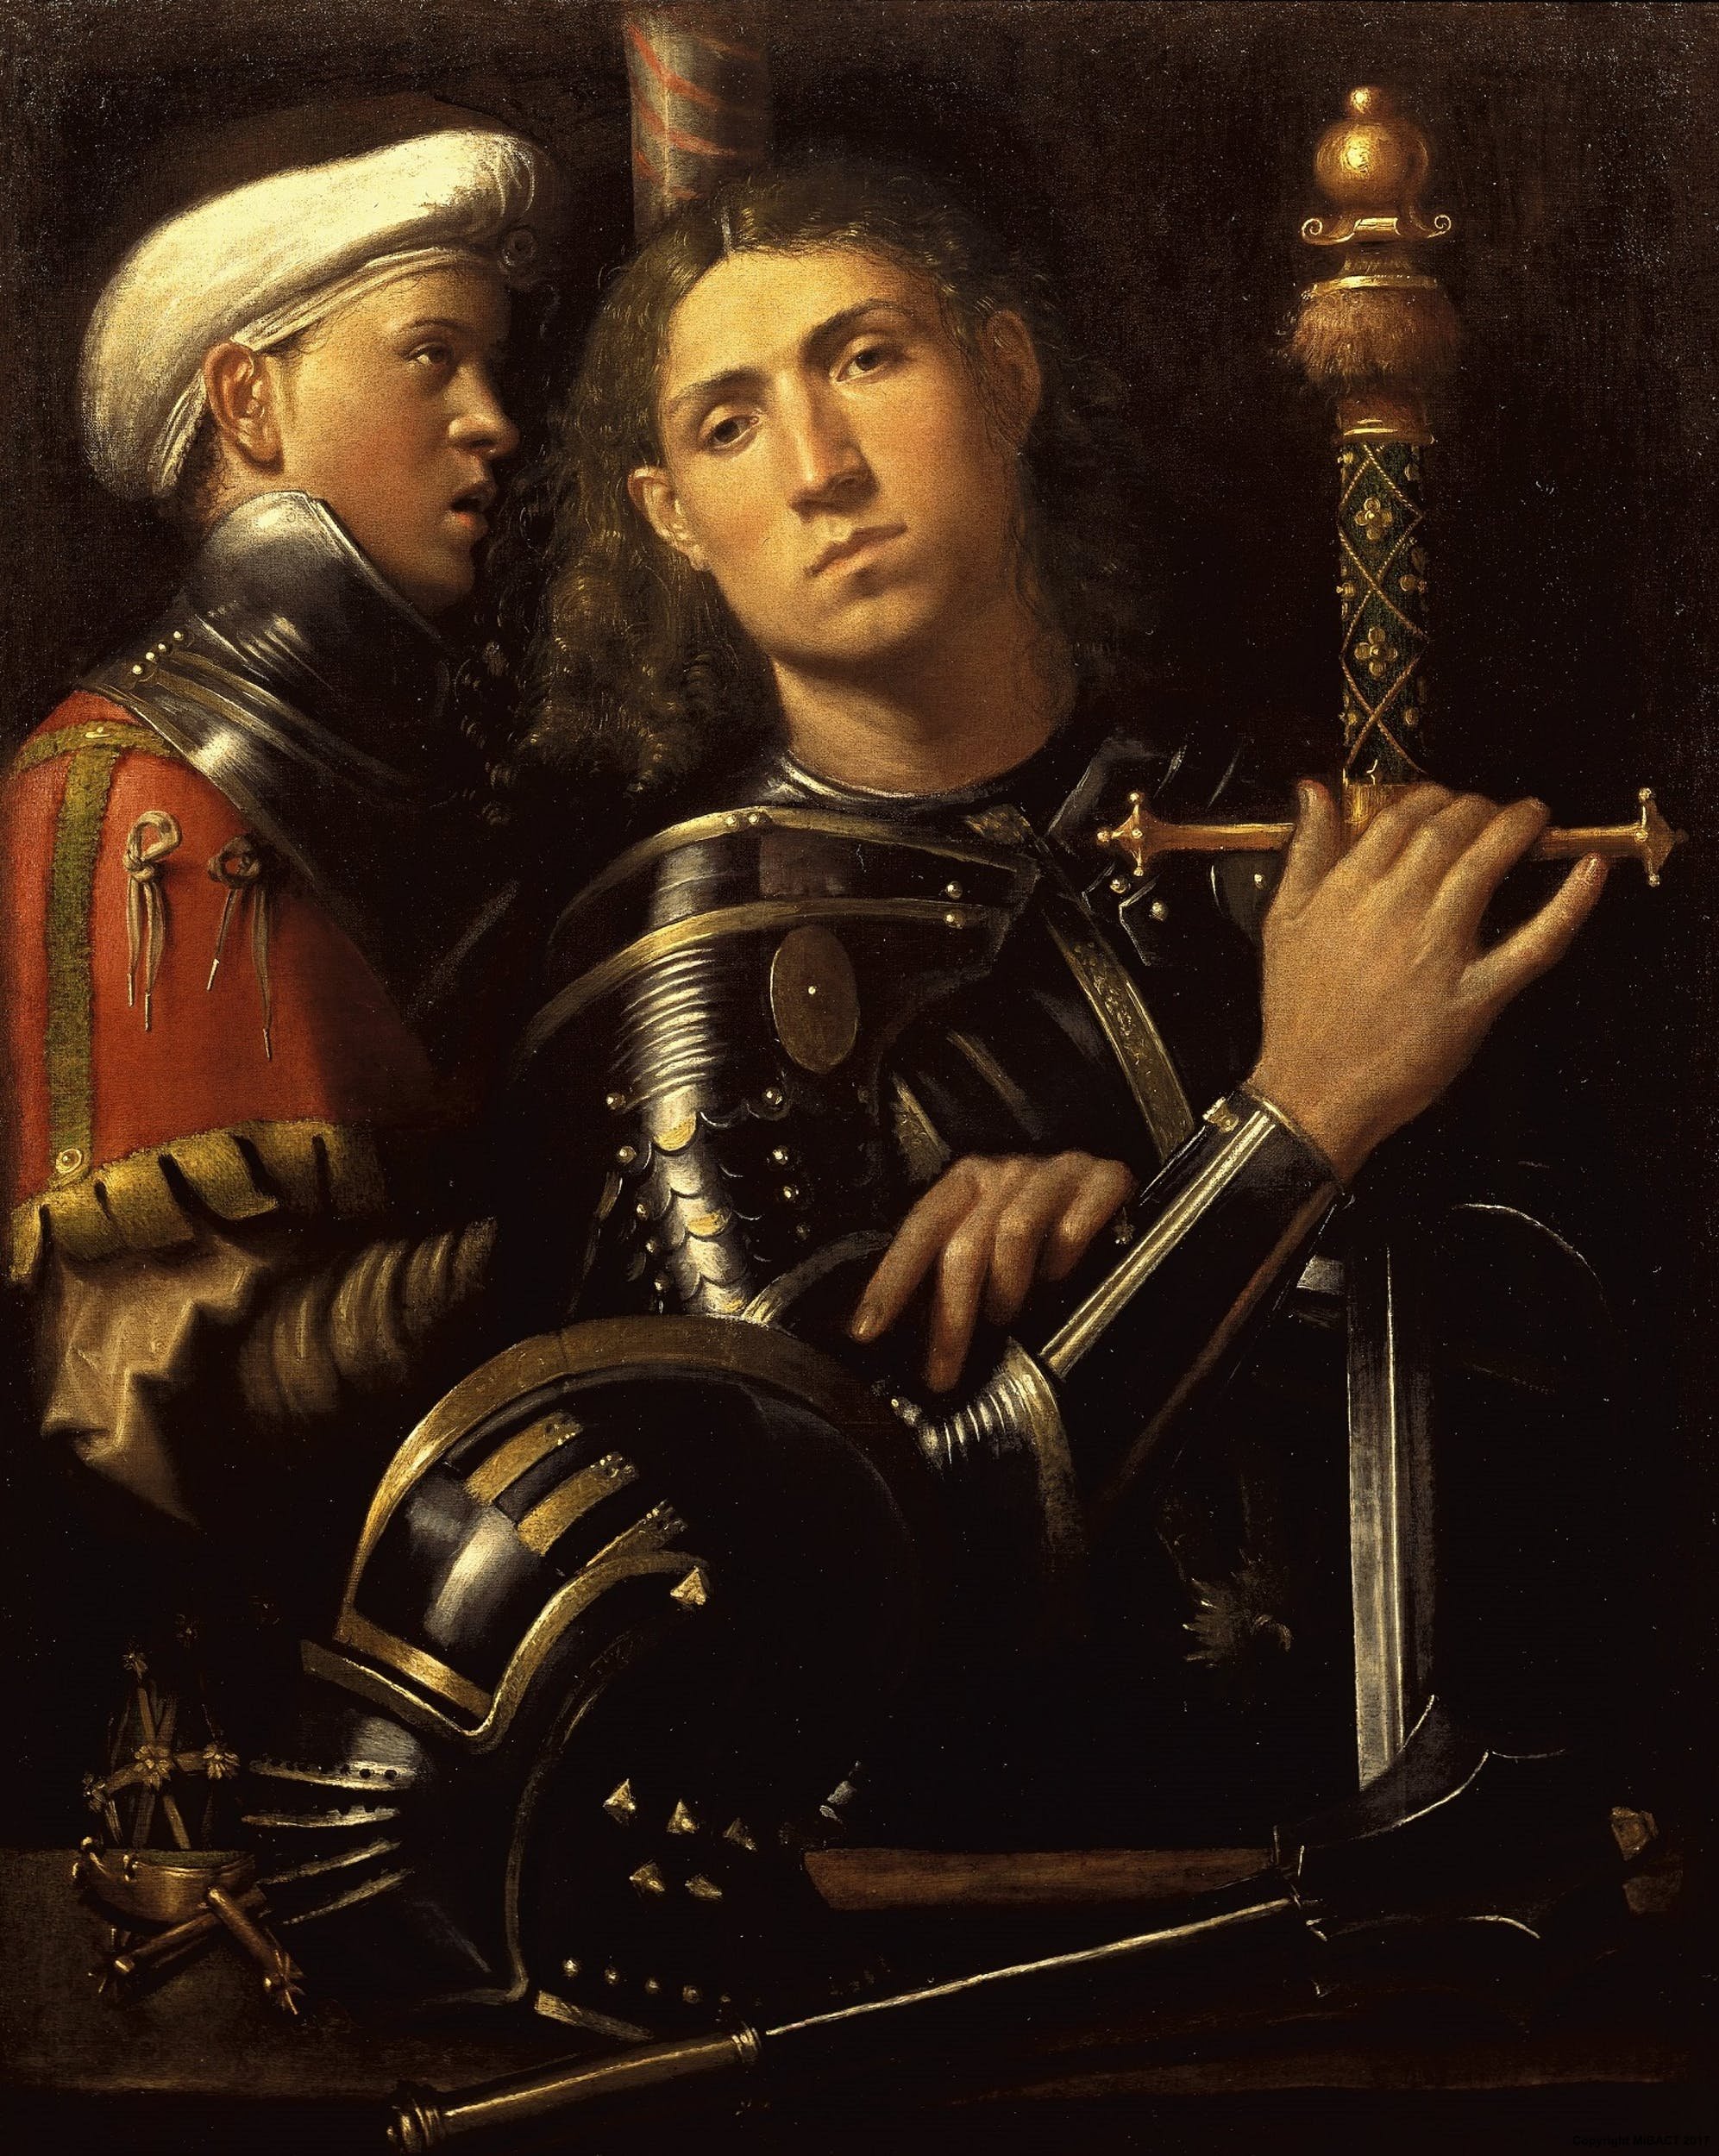 Giorgione, Portrait of Man in Armour with a Squire